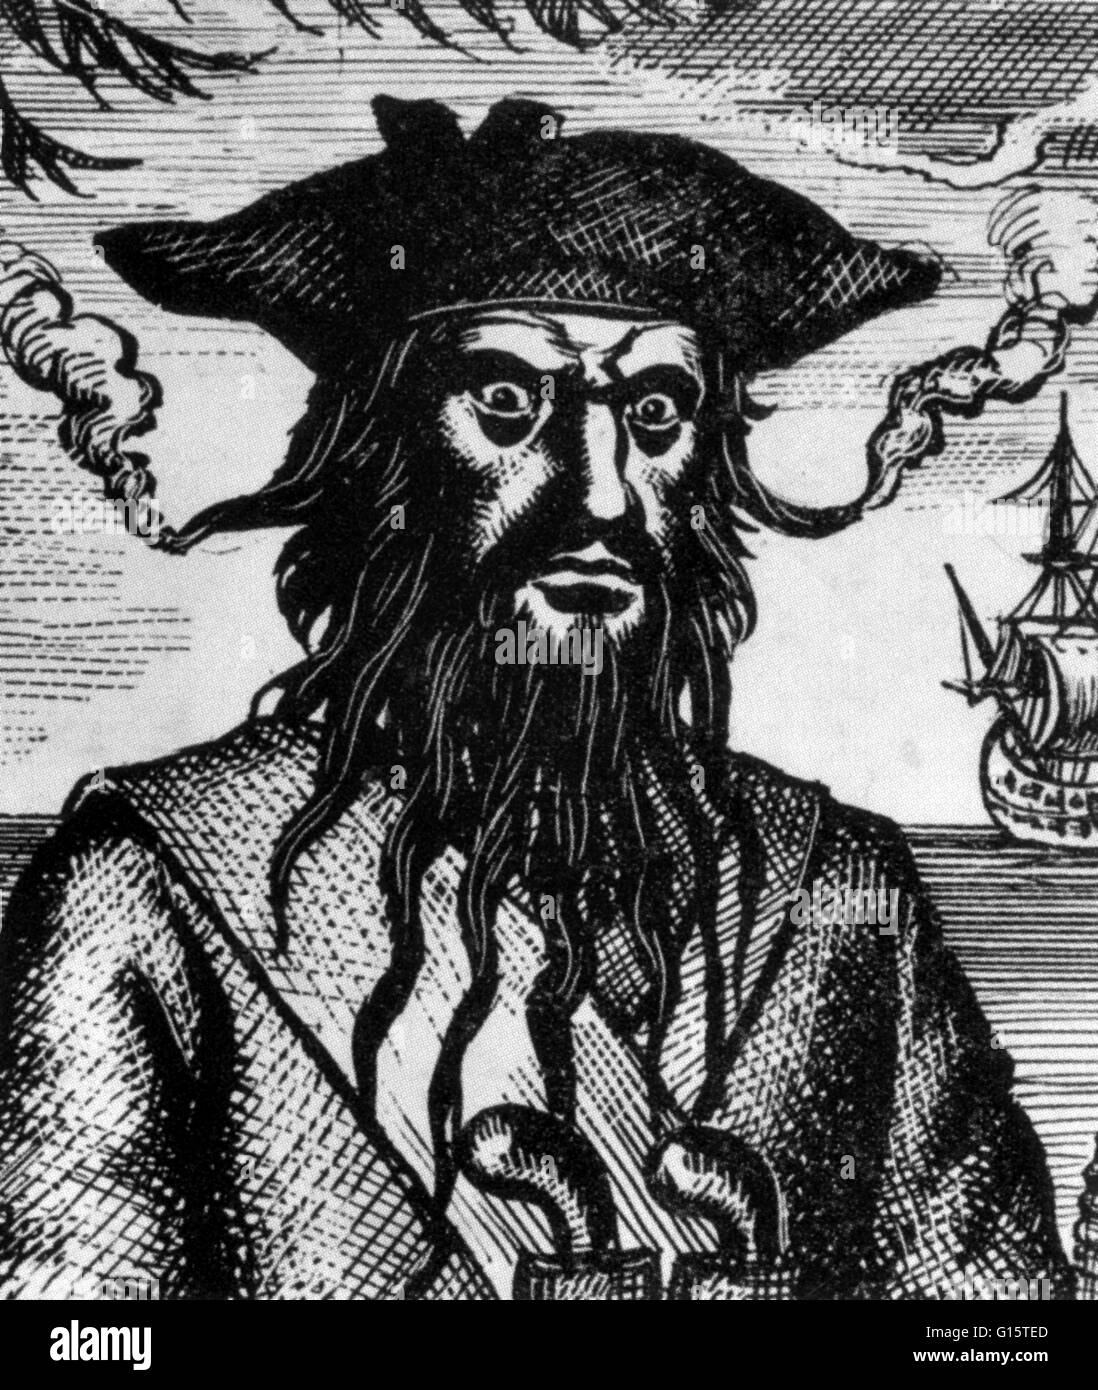 Edward Teach (1680 - November 22, 1718), better known as Blackbeard, was a notorious English pirate who operated around the West Indies and the eastern coast of the American colonies. He was a sailor on privateer ships during Queen Anne's War. By war's en Stock Photo